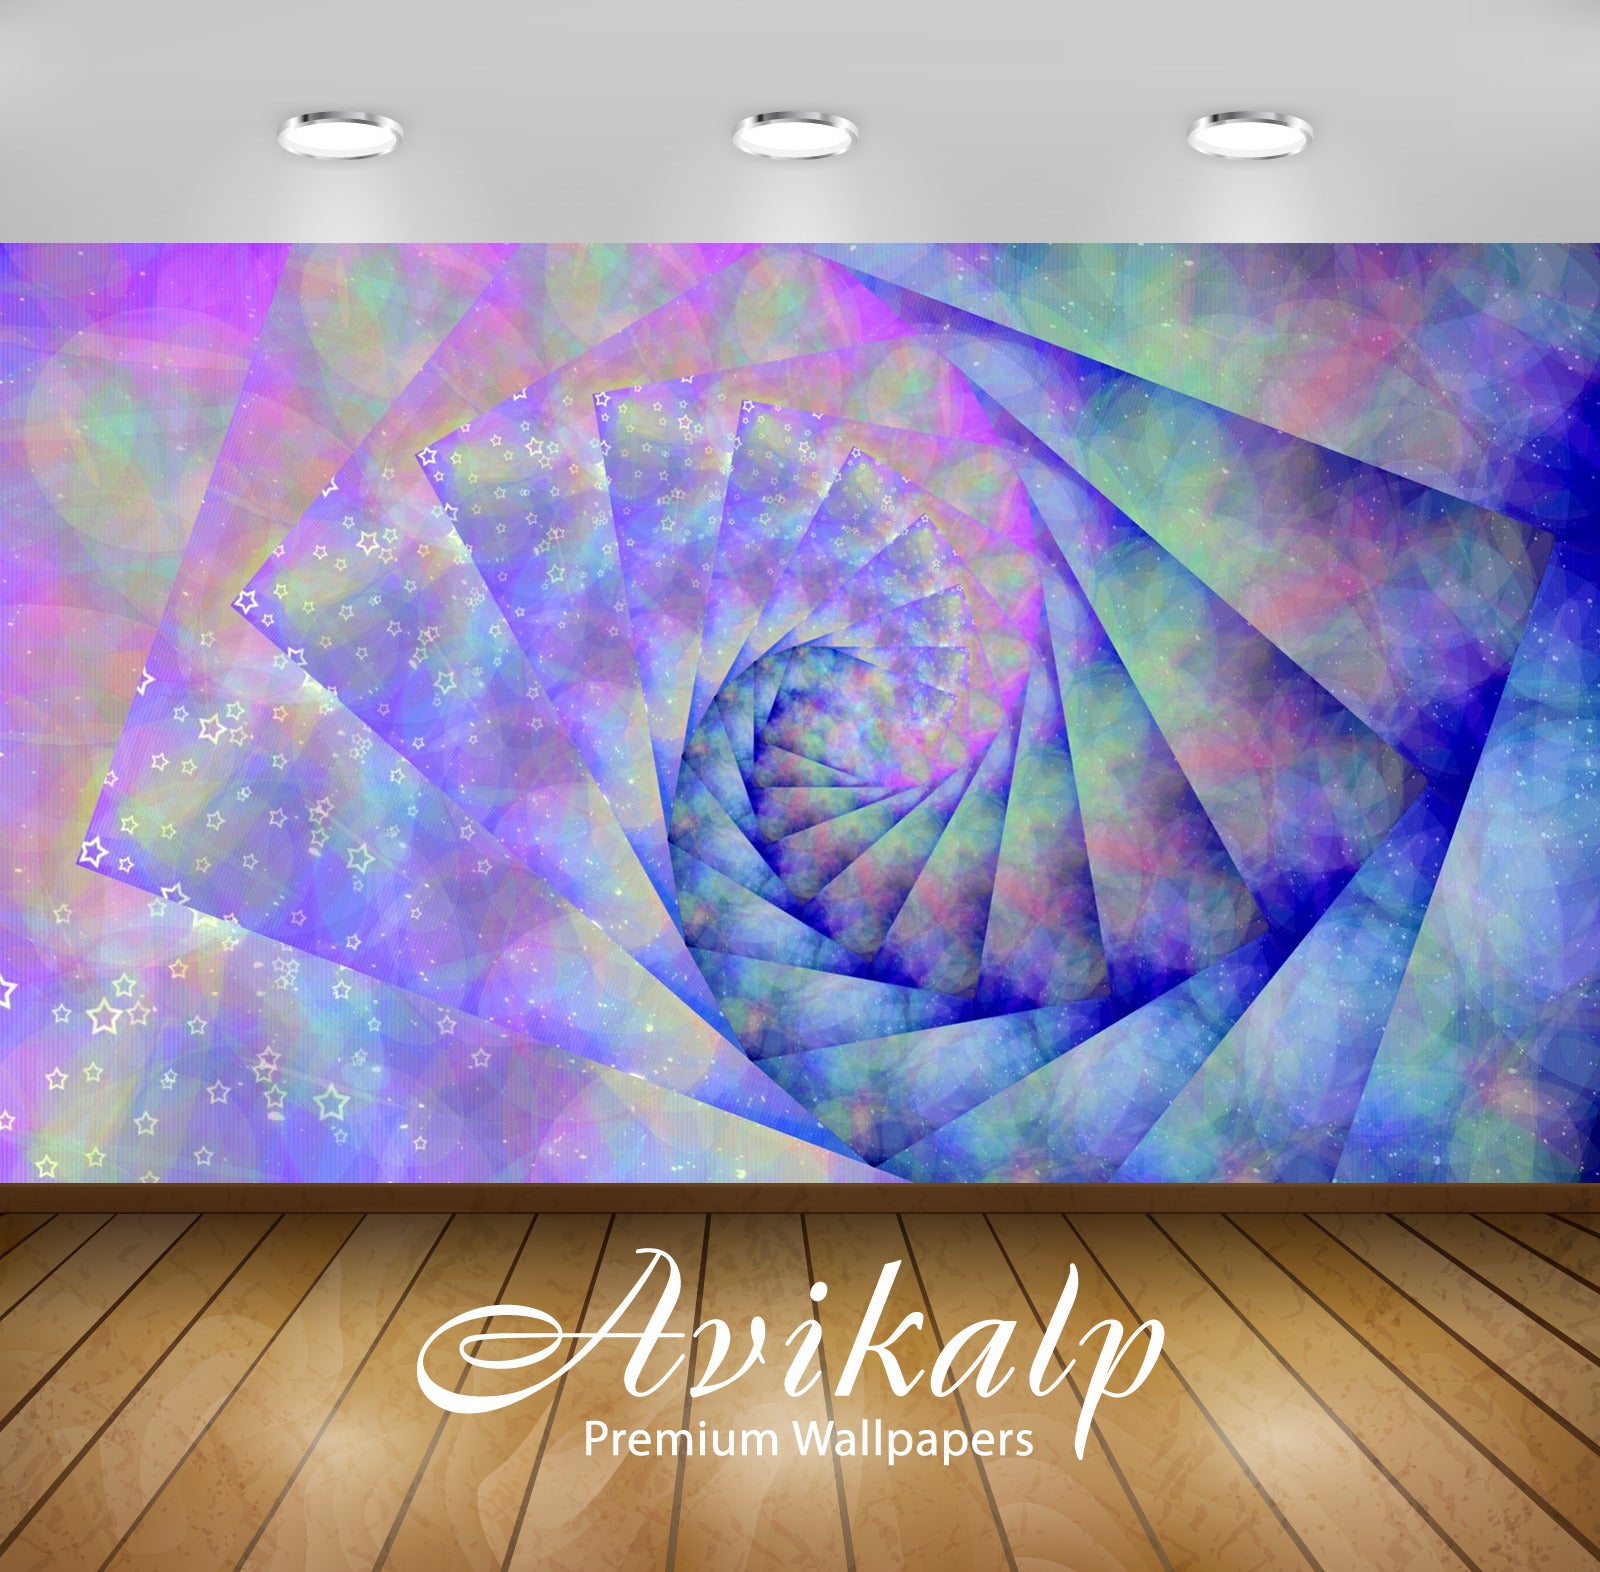 Avikalp Exclusive Awi4197 Colorful Spiral Full HD Wallpapers for Living room, Hall, Kids Room, Kitch